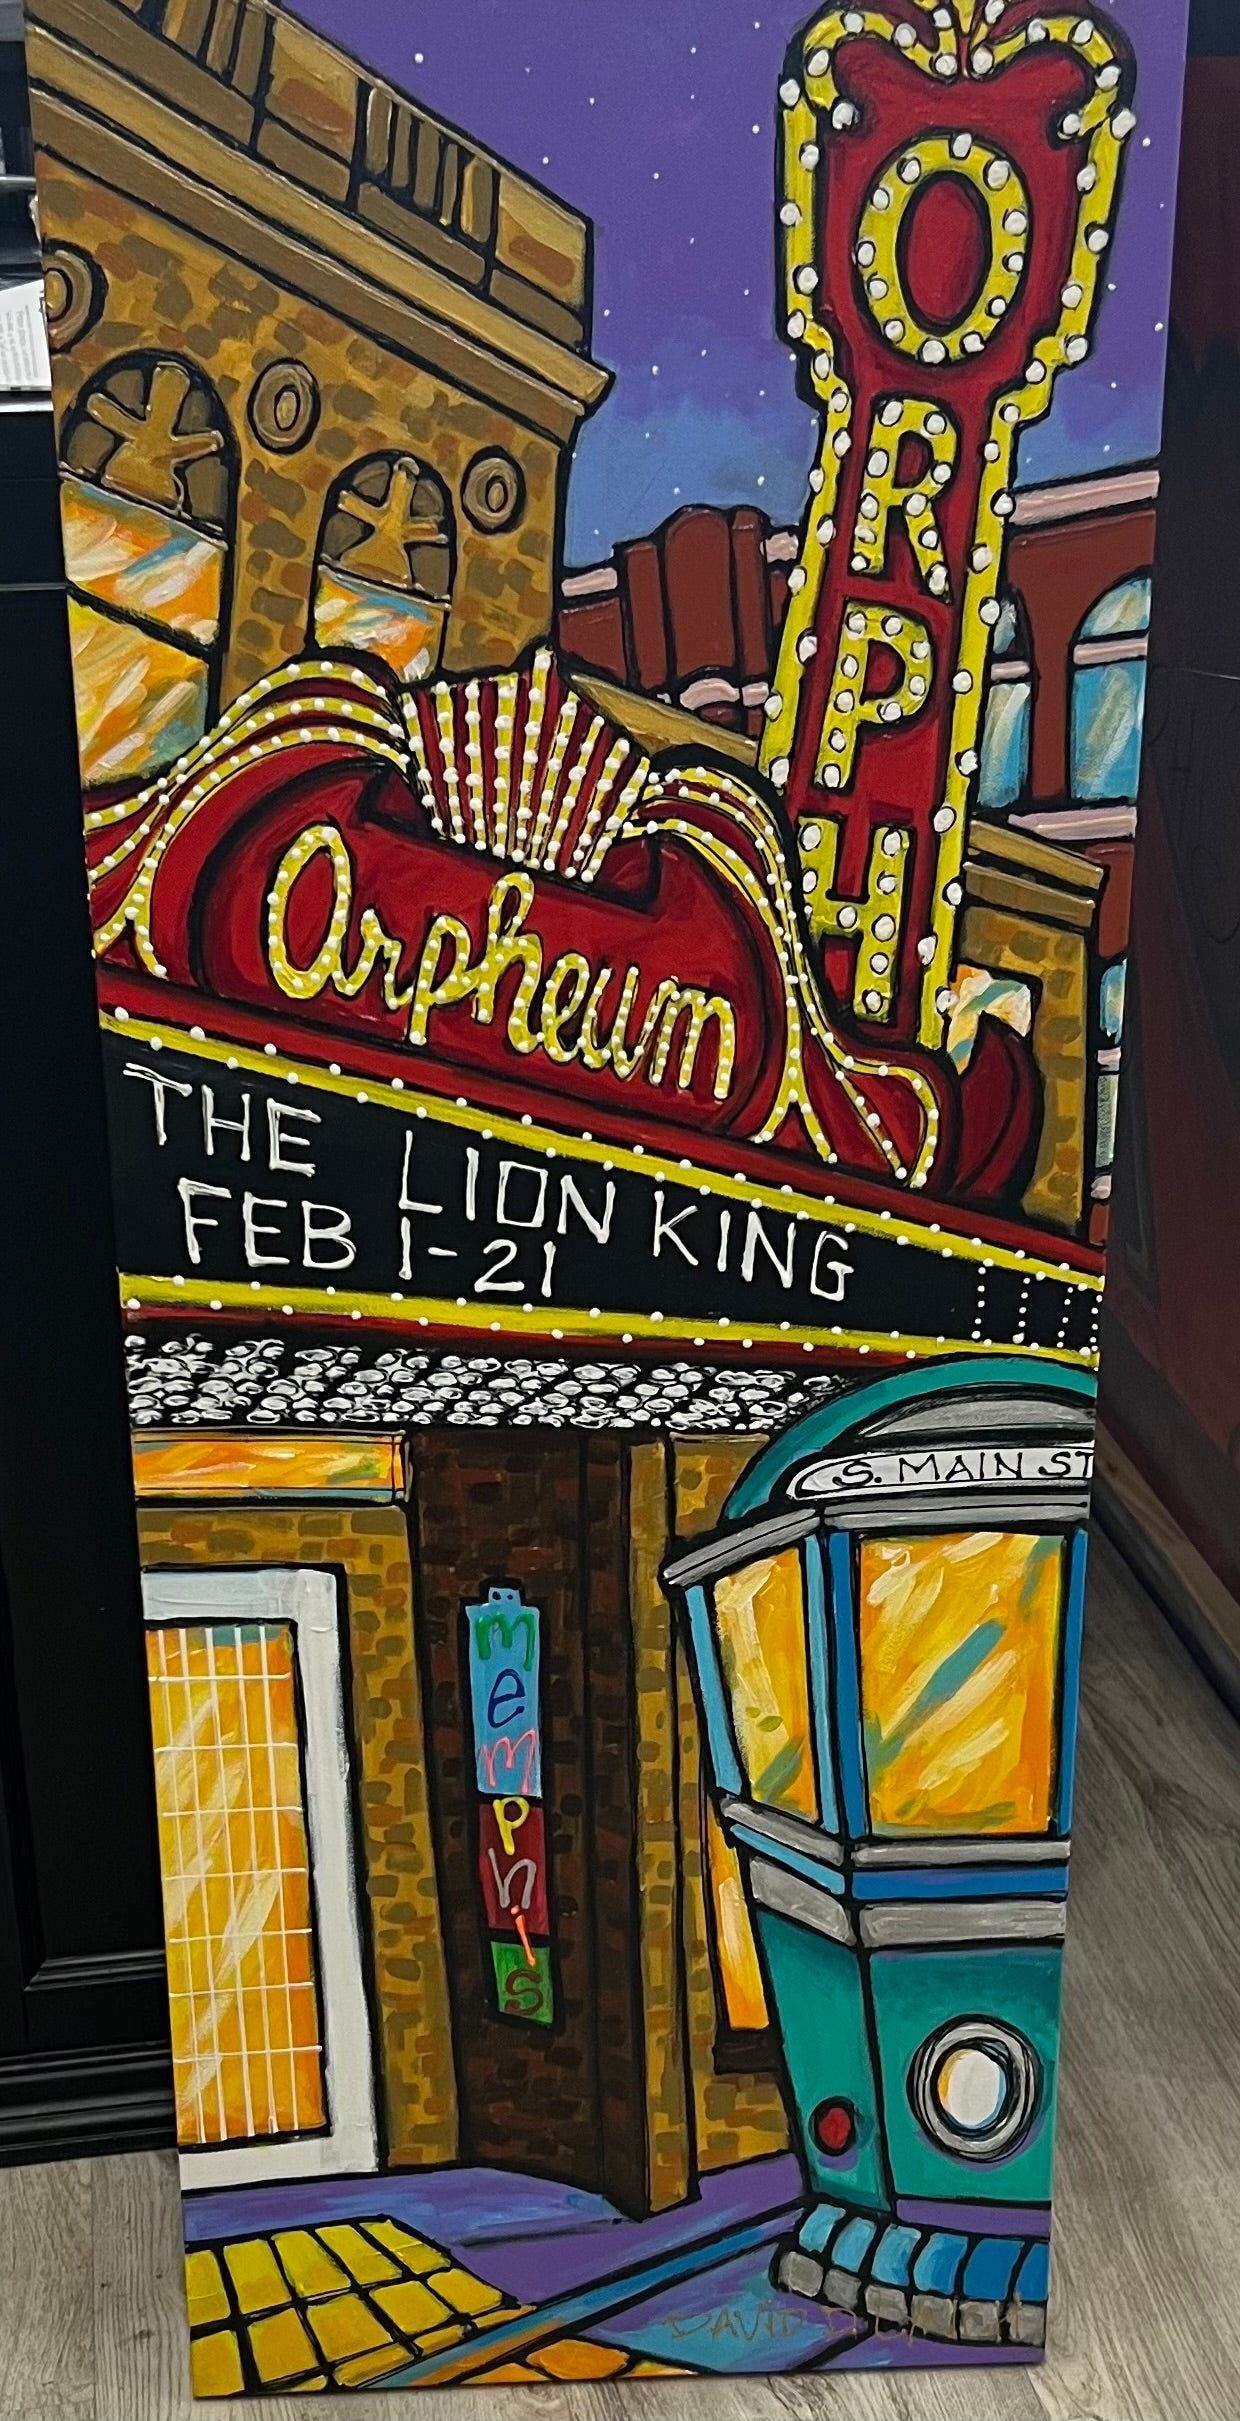 "The Orpheum Theatre" by David Lynch